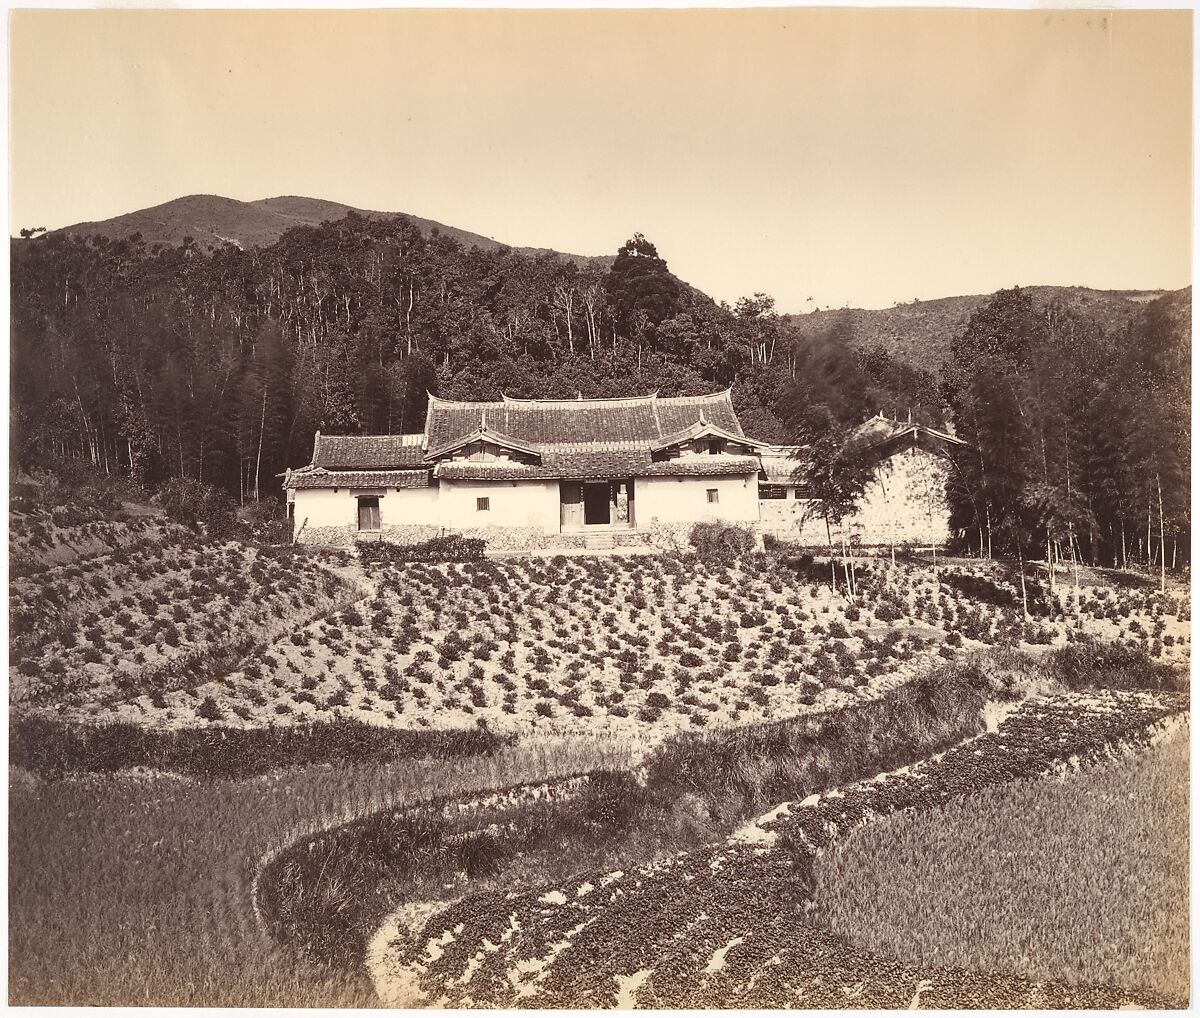 Teafield & Josshouse at Peling, Attributed to Tung Hing (Chinese, active 1870s), Albumen silver print from glass negative 